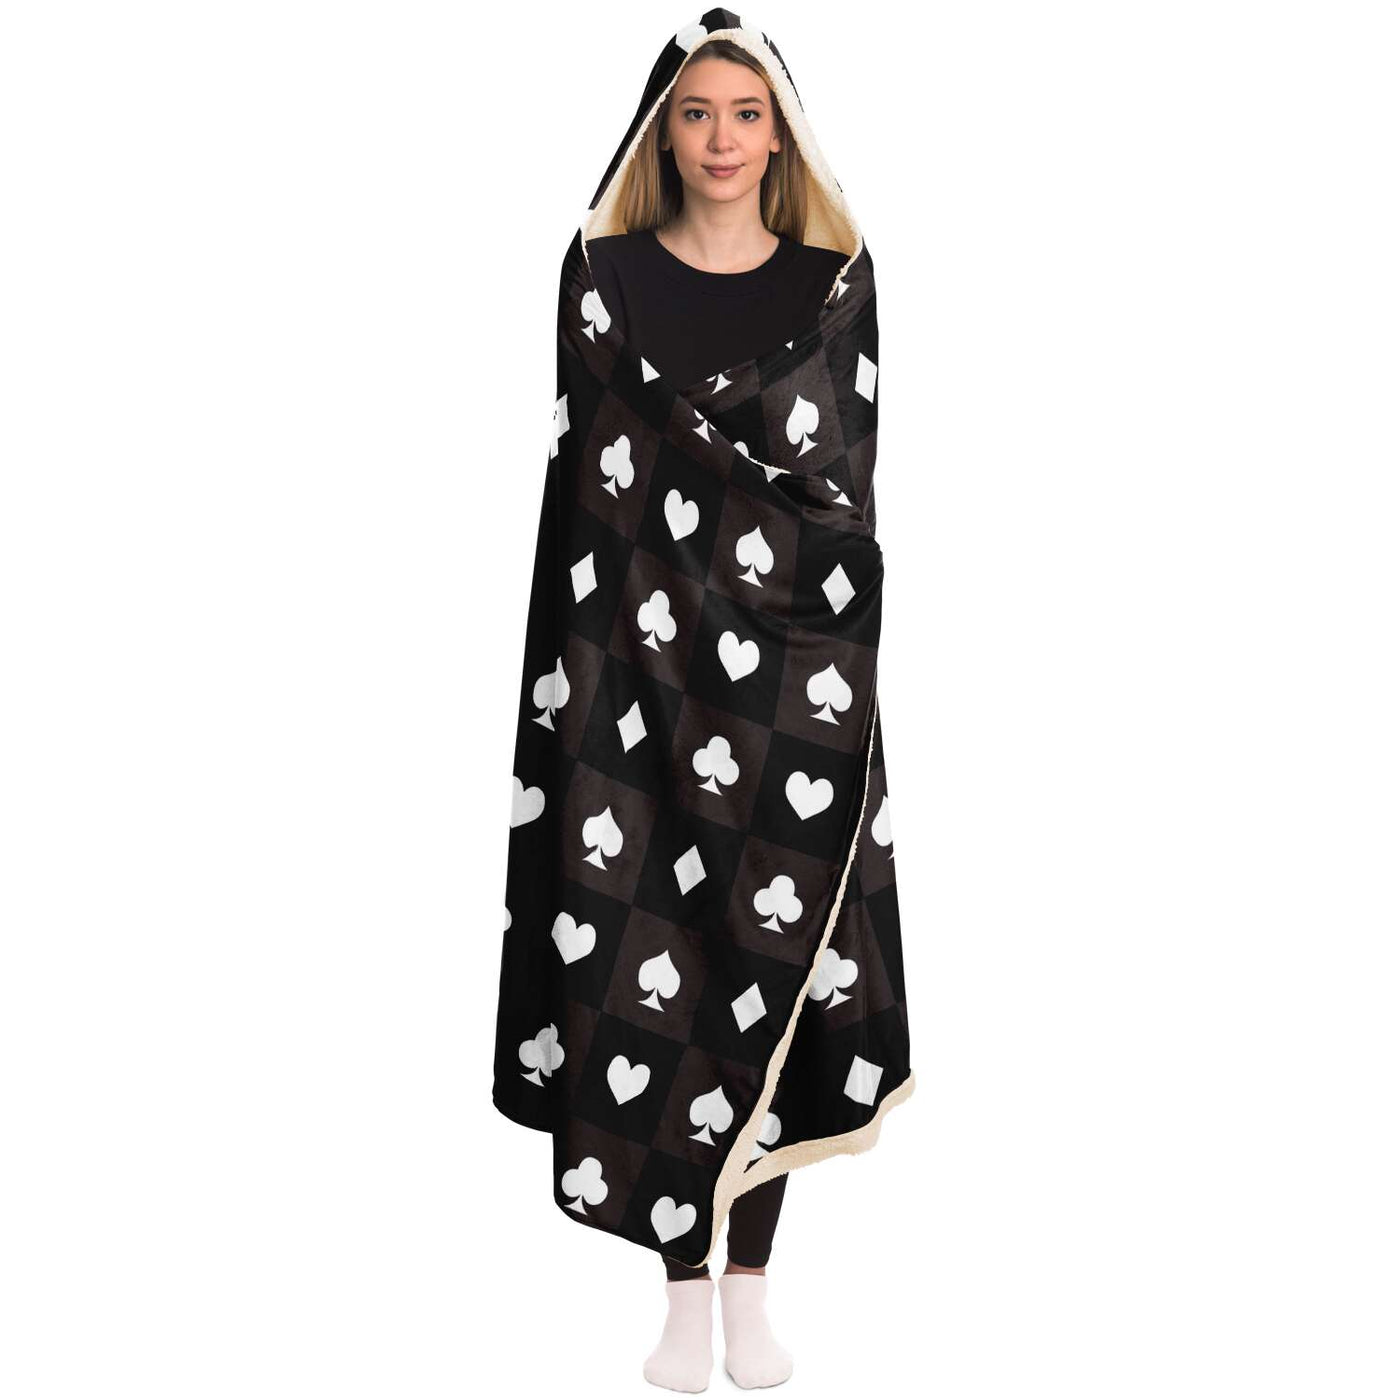 Light Gray Evil Alice Riding A Human Skeleton Head On A Stick | Hooded Blanket